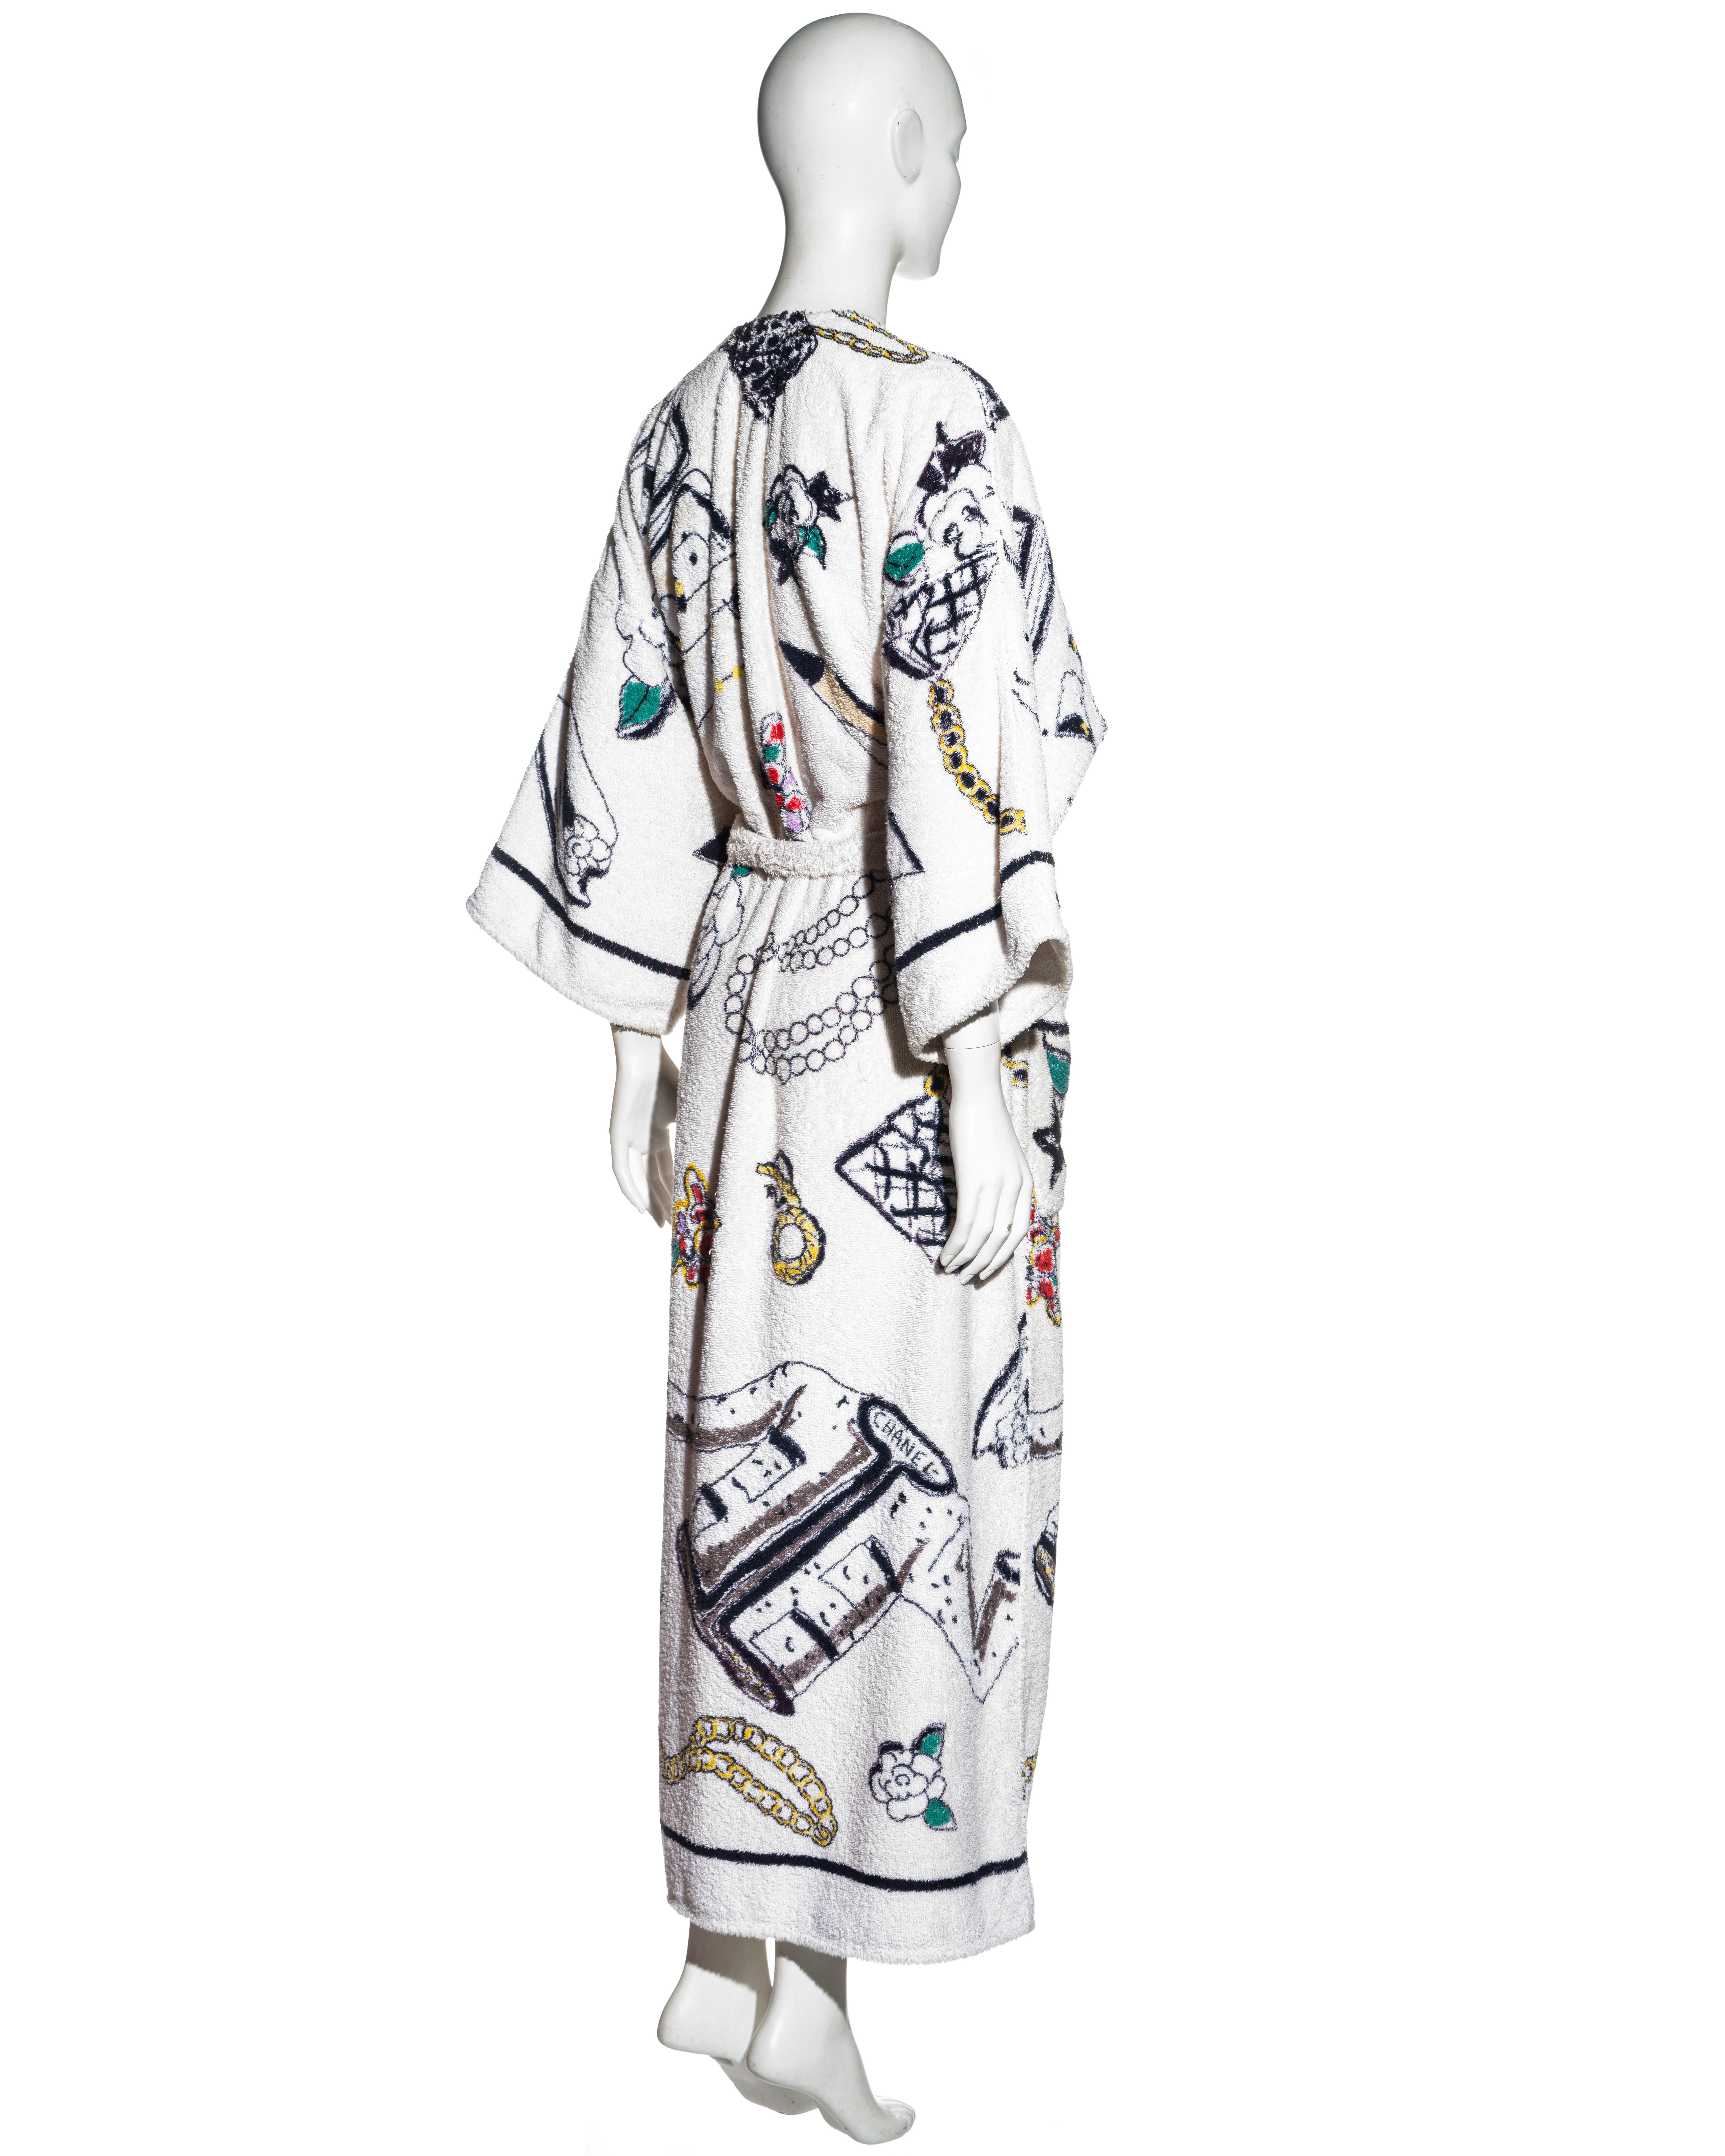 Women's Chanel by Karl Lagerfeld terry cloth robe, ss 1994 For Sale